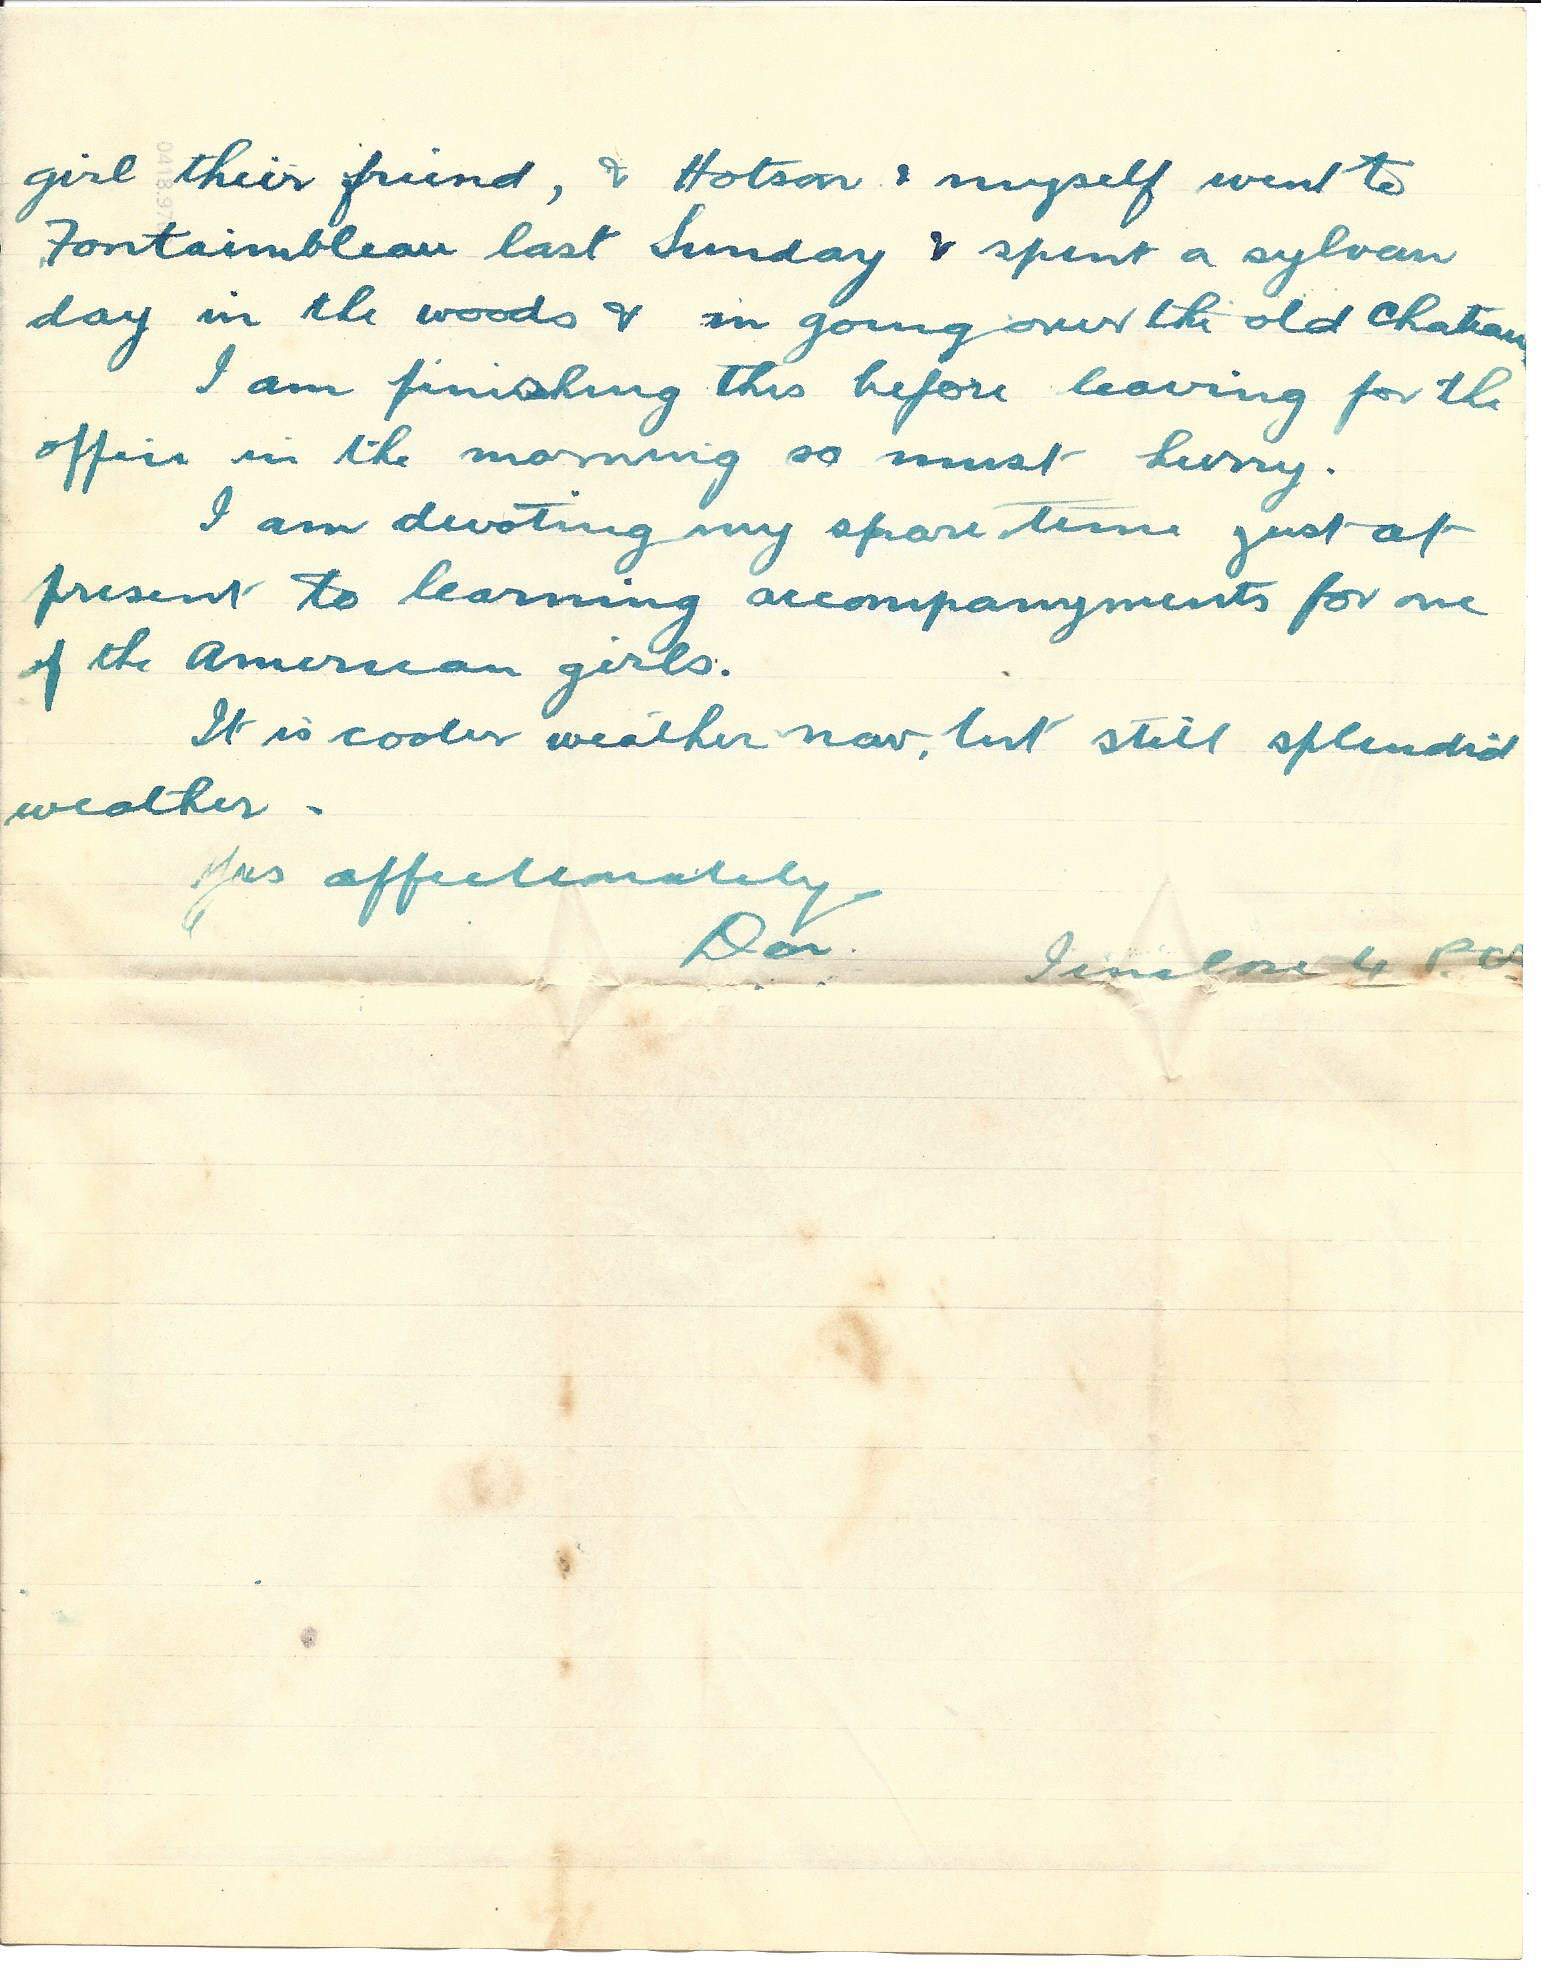 1919-08-27 page 2 letter by Donald Bearman